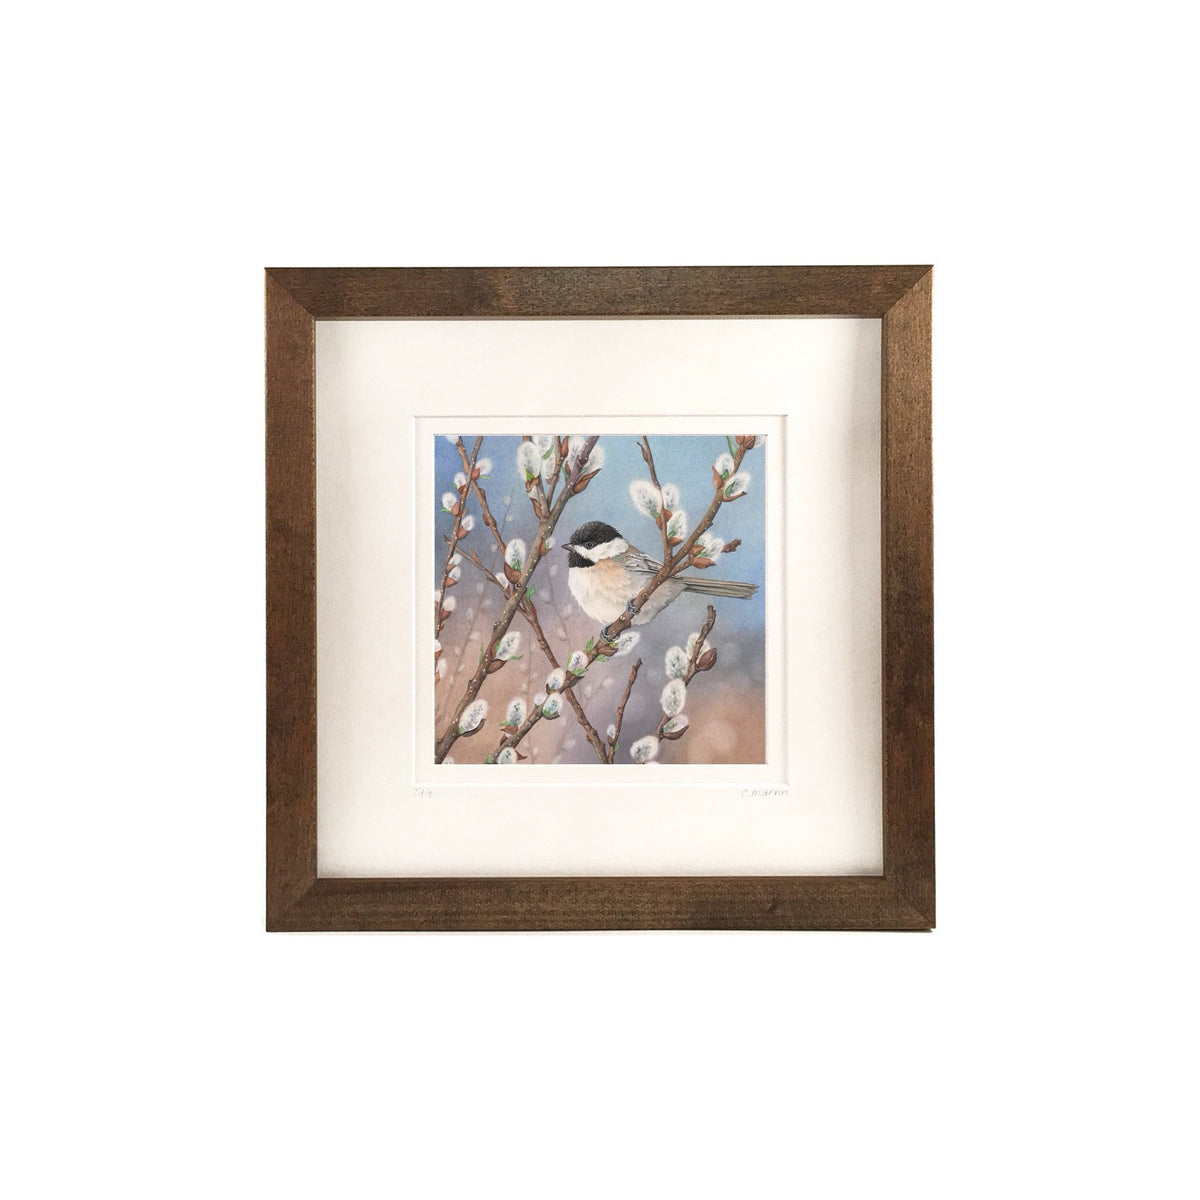 Cori Lee Marvin Framed Print- Waiting in the Willows